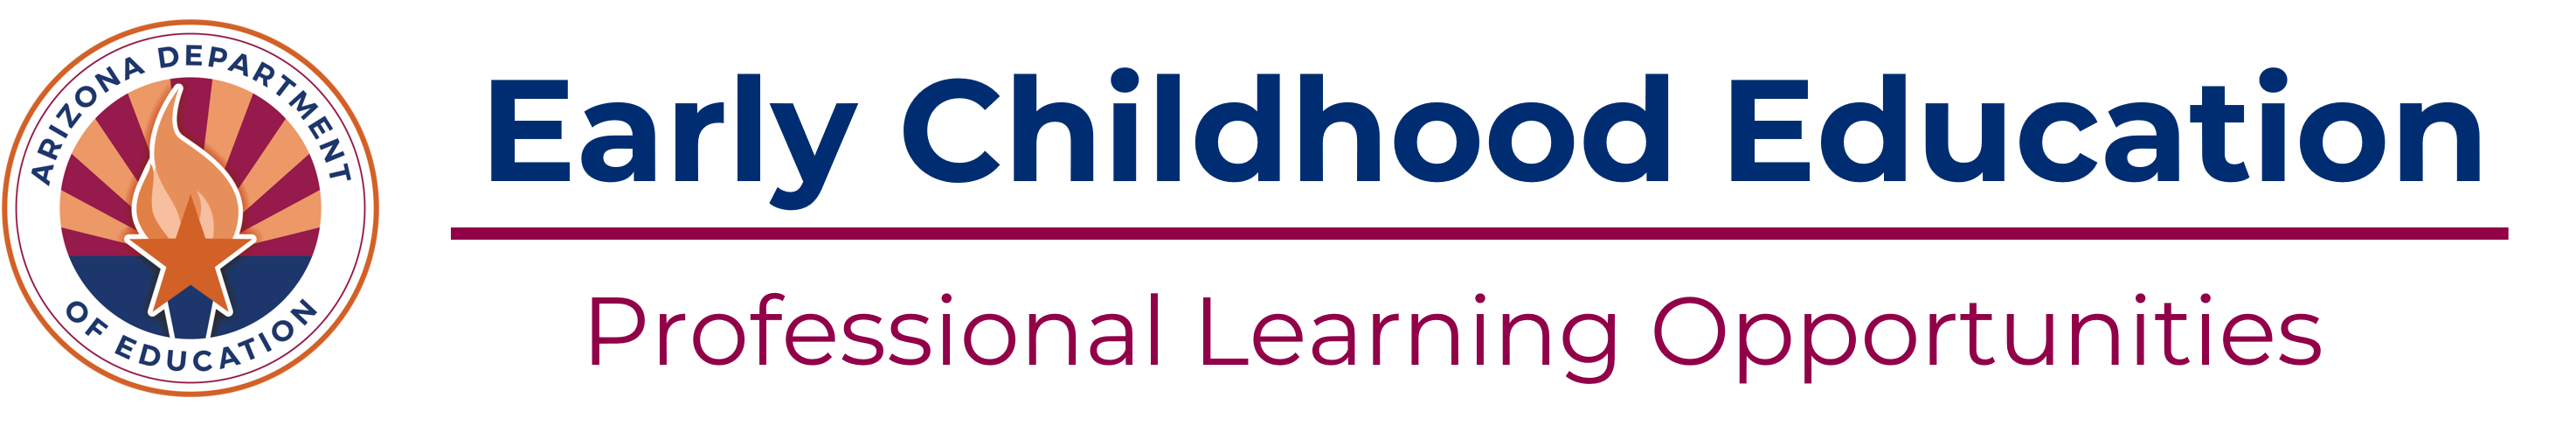 ADE logo seal on the left of the image; to the right are the words Early Childhood Education on top of the words Professional Learning Opportunities